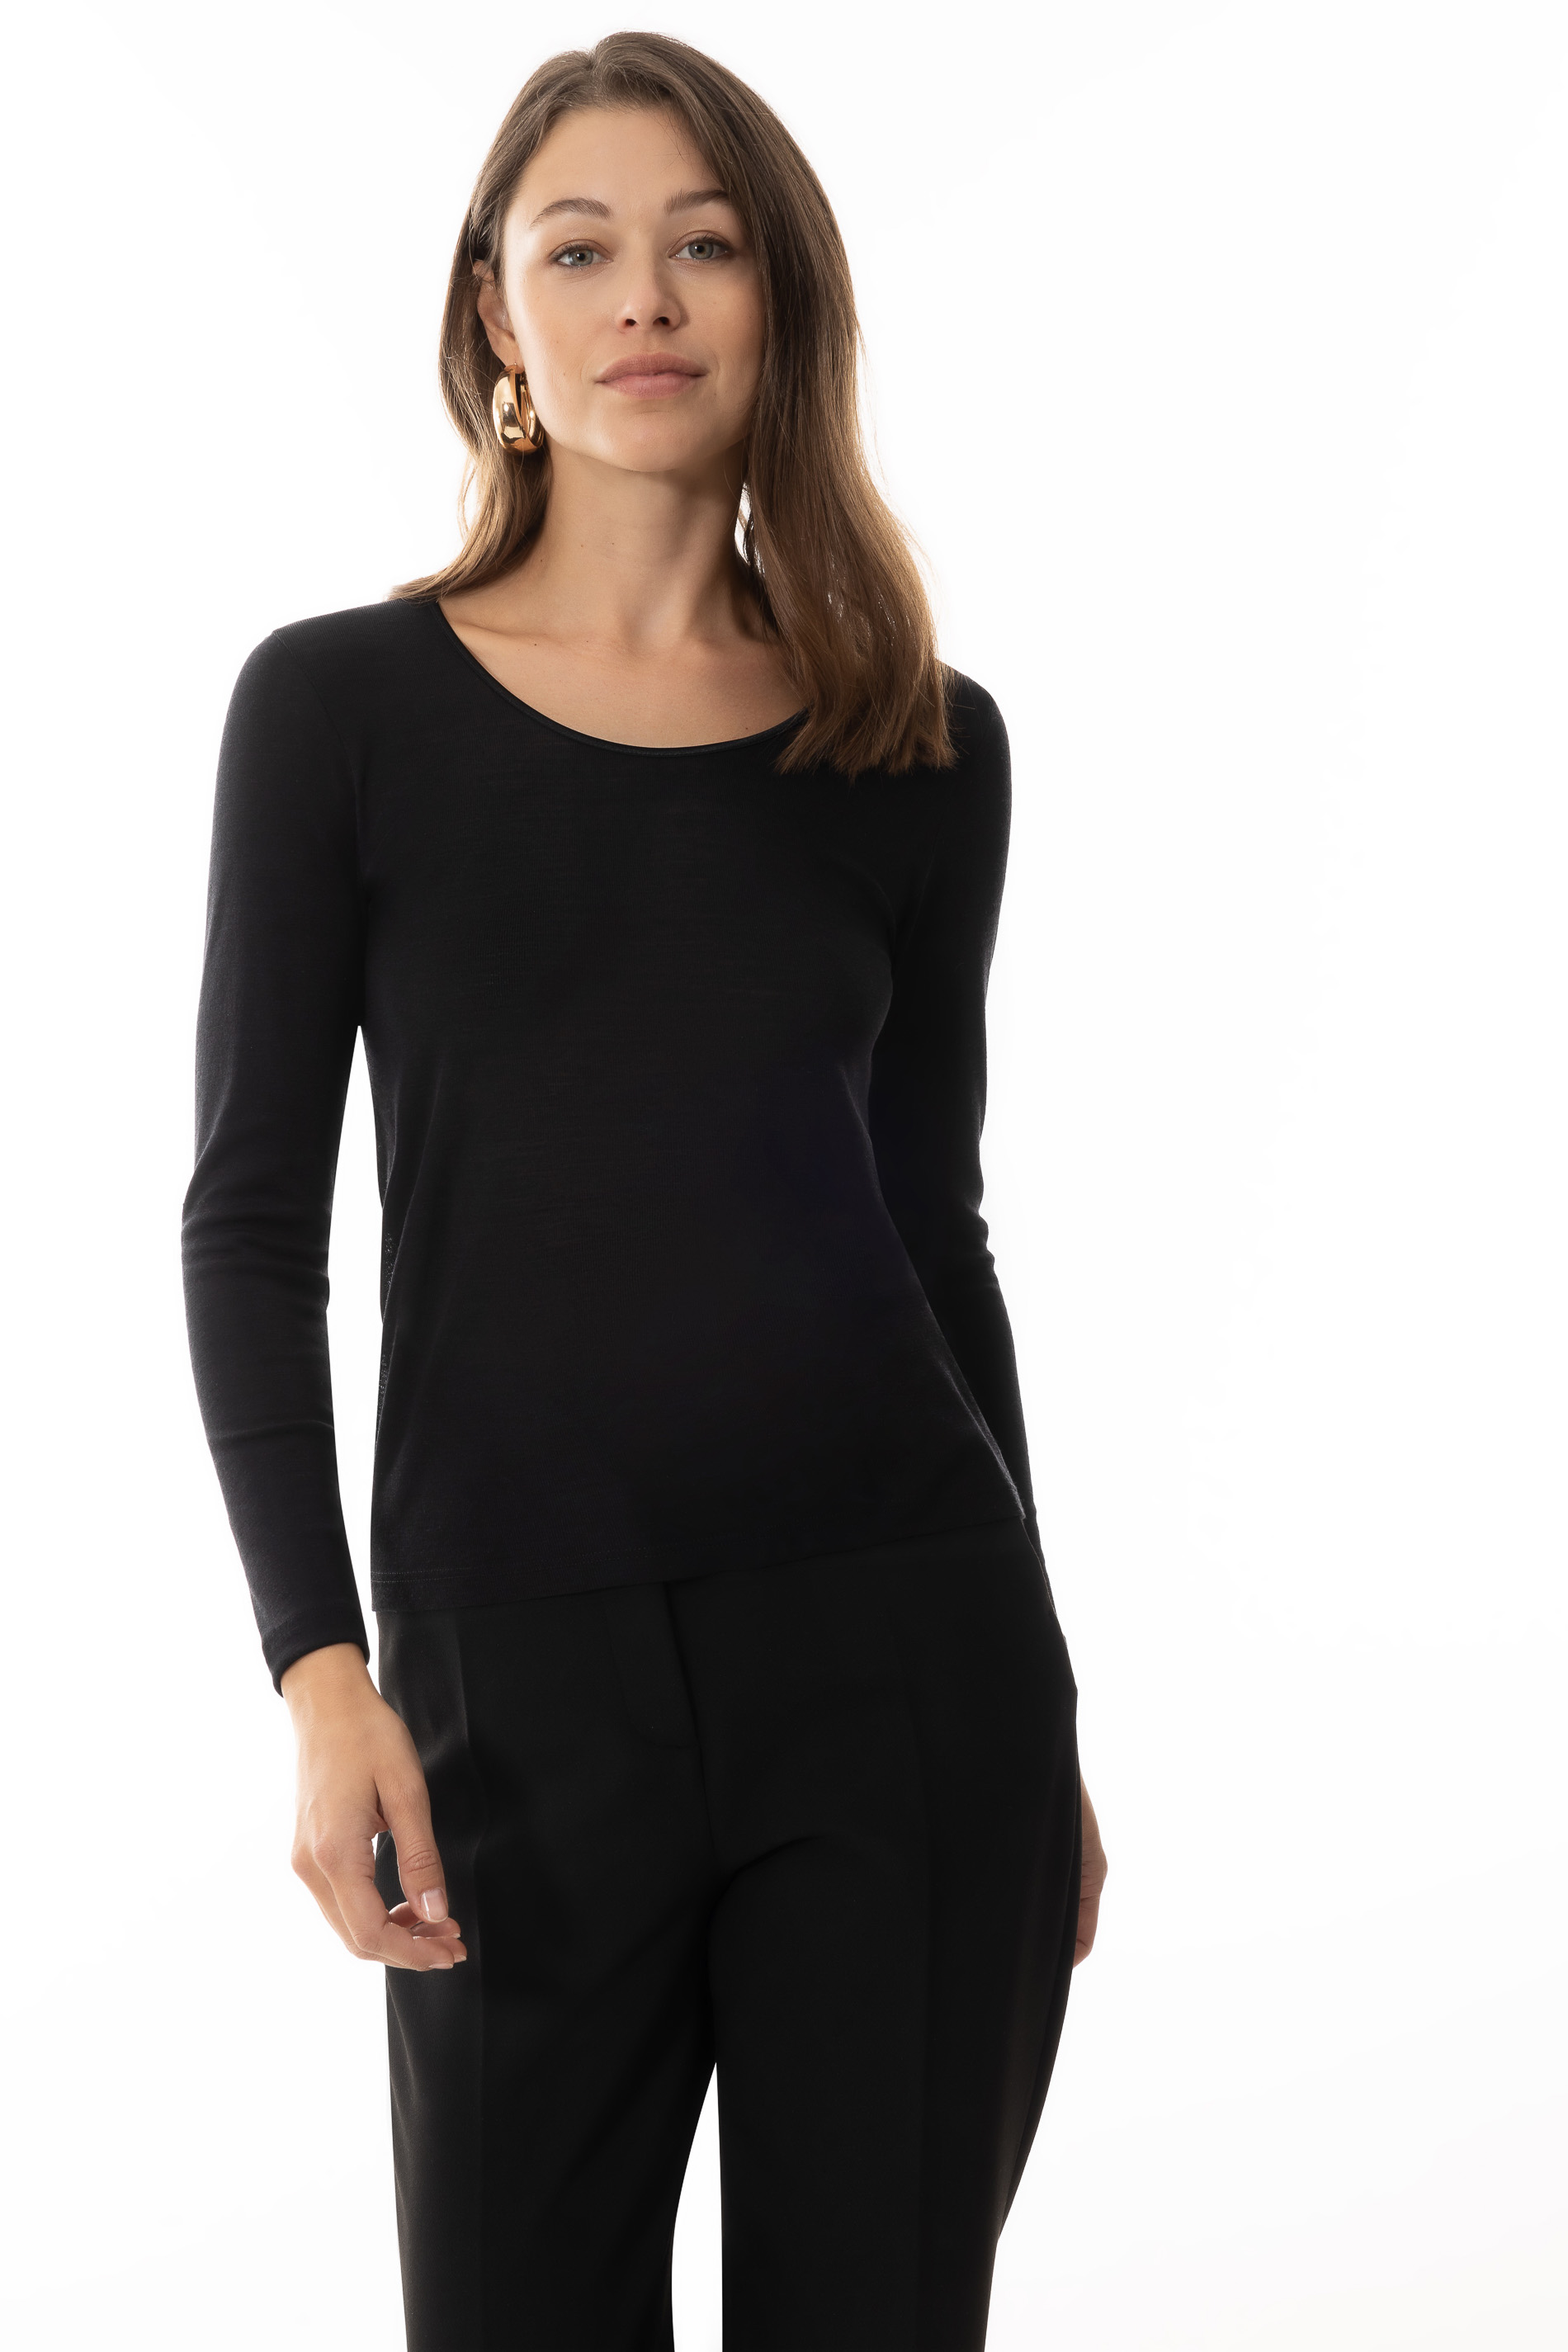 Long-sleeved vest Black Serie Exquisite Front View | mey®